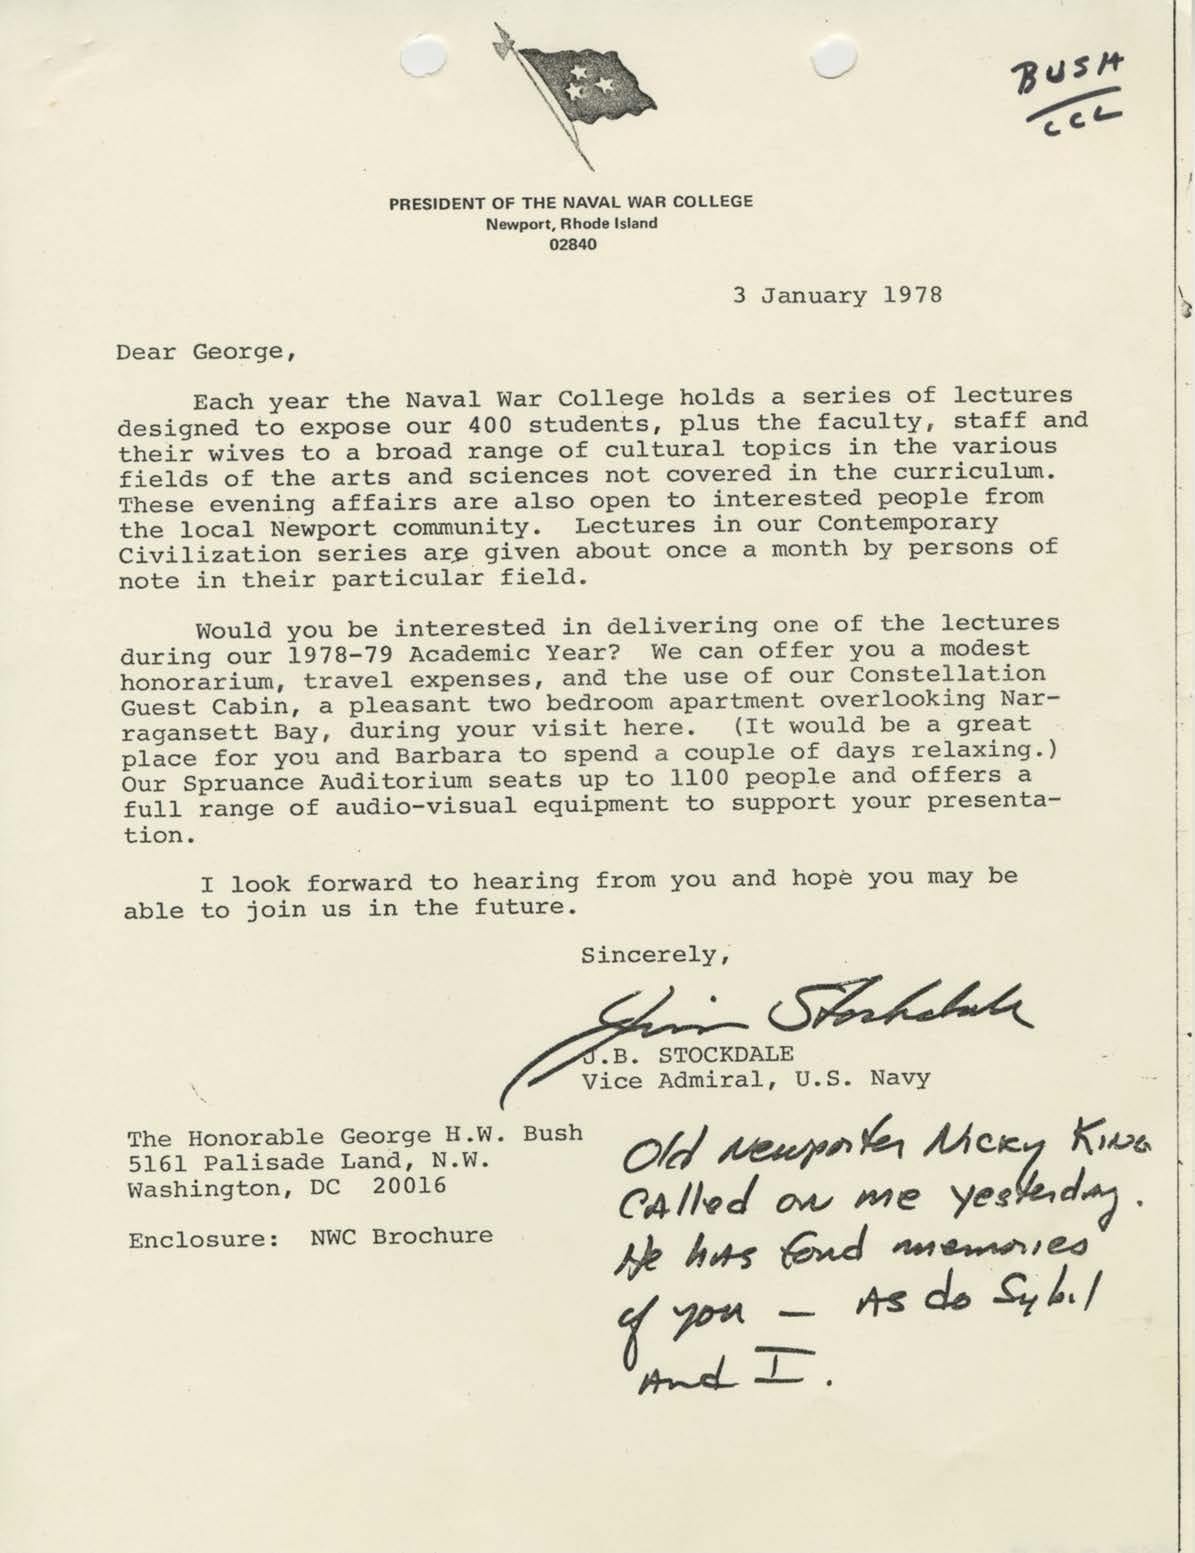 Letter to George H.W. Bush from James B. Stockdale